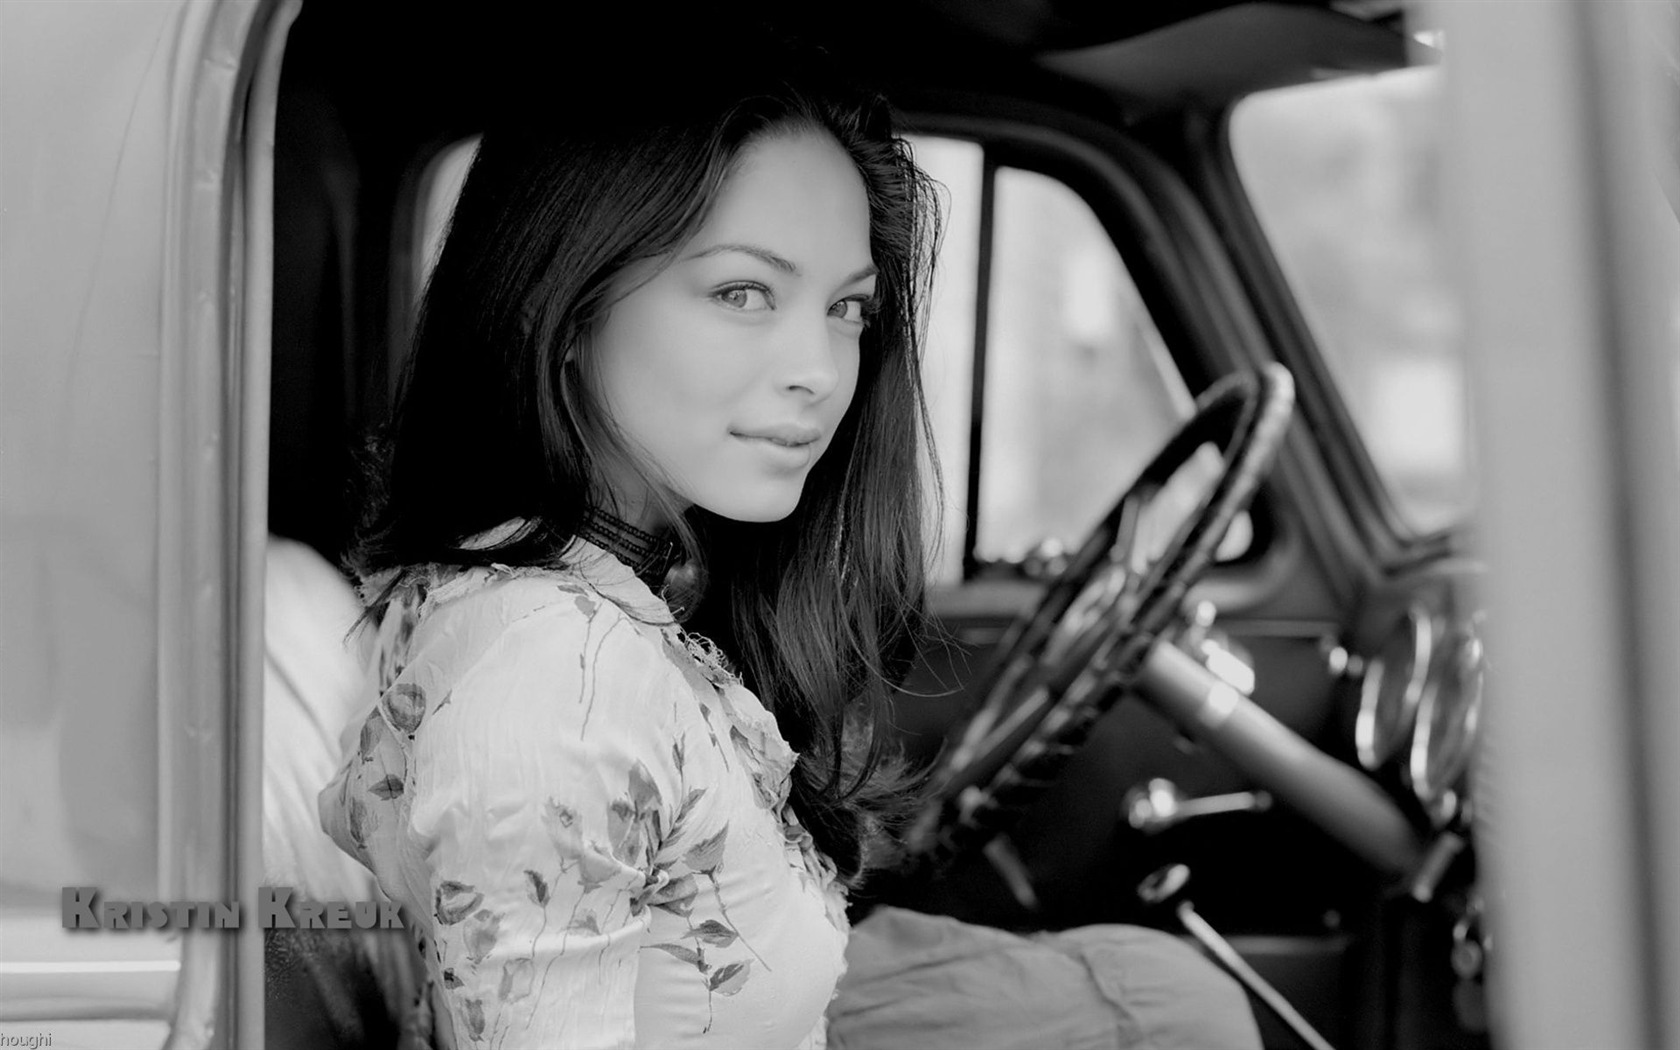 Kristin Kreuk #010 - 1680x1050 Wallpapers Pictures Photos Images